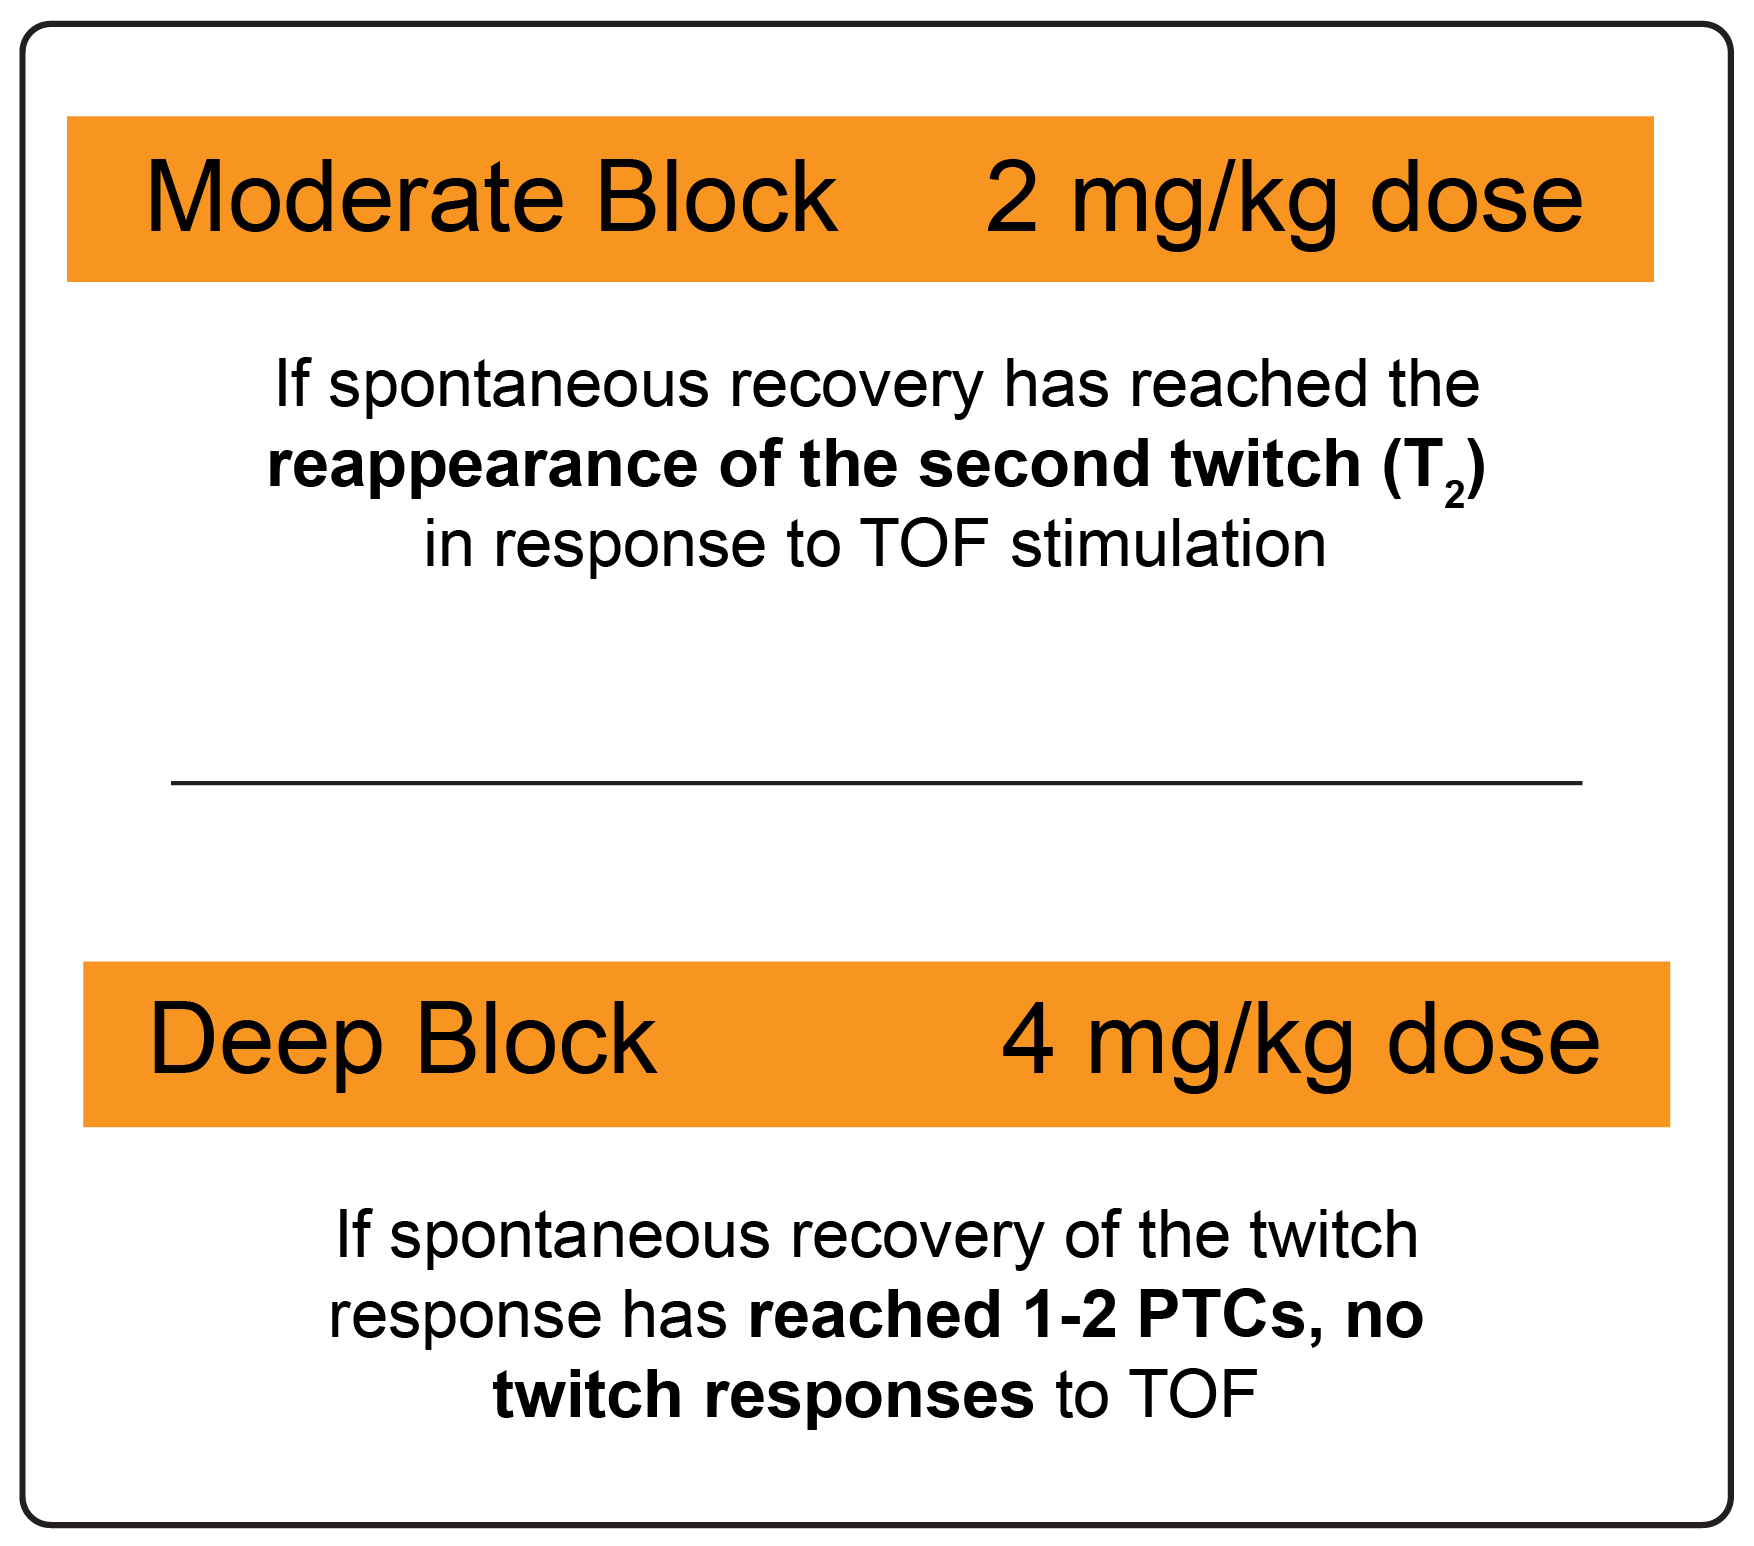 Dosing Recommendation Based on Body Weight and Block Depth